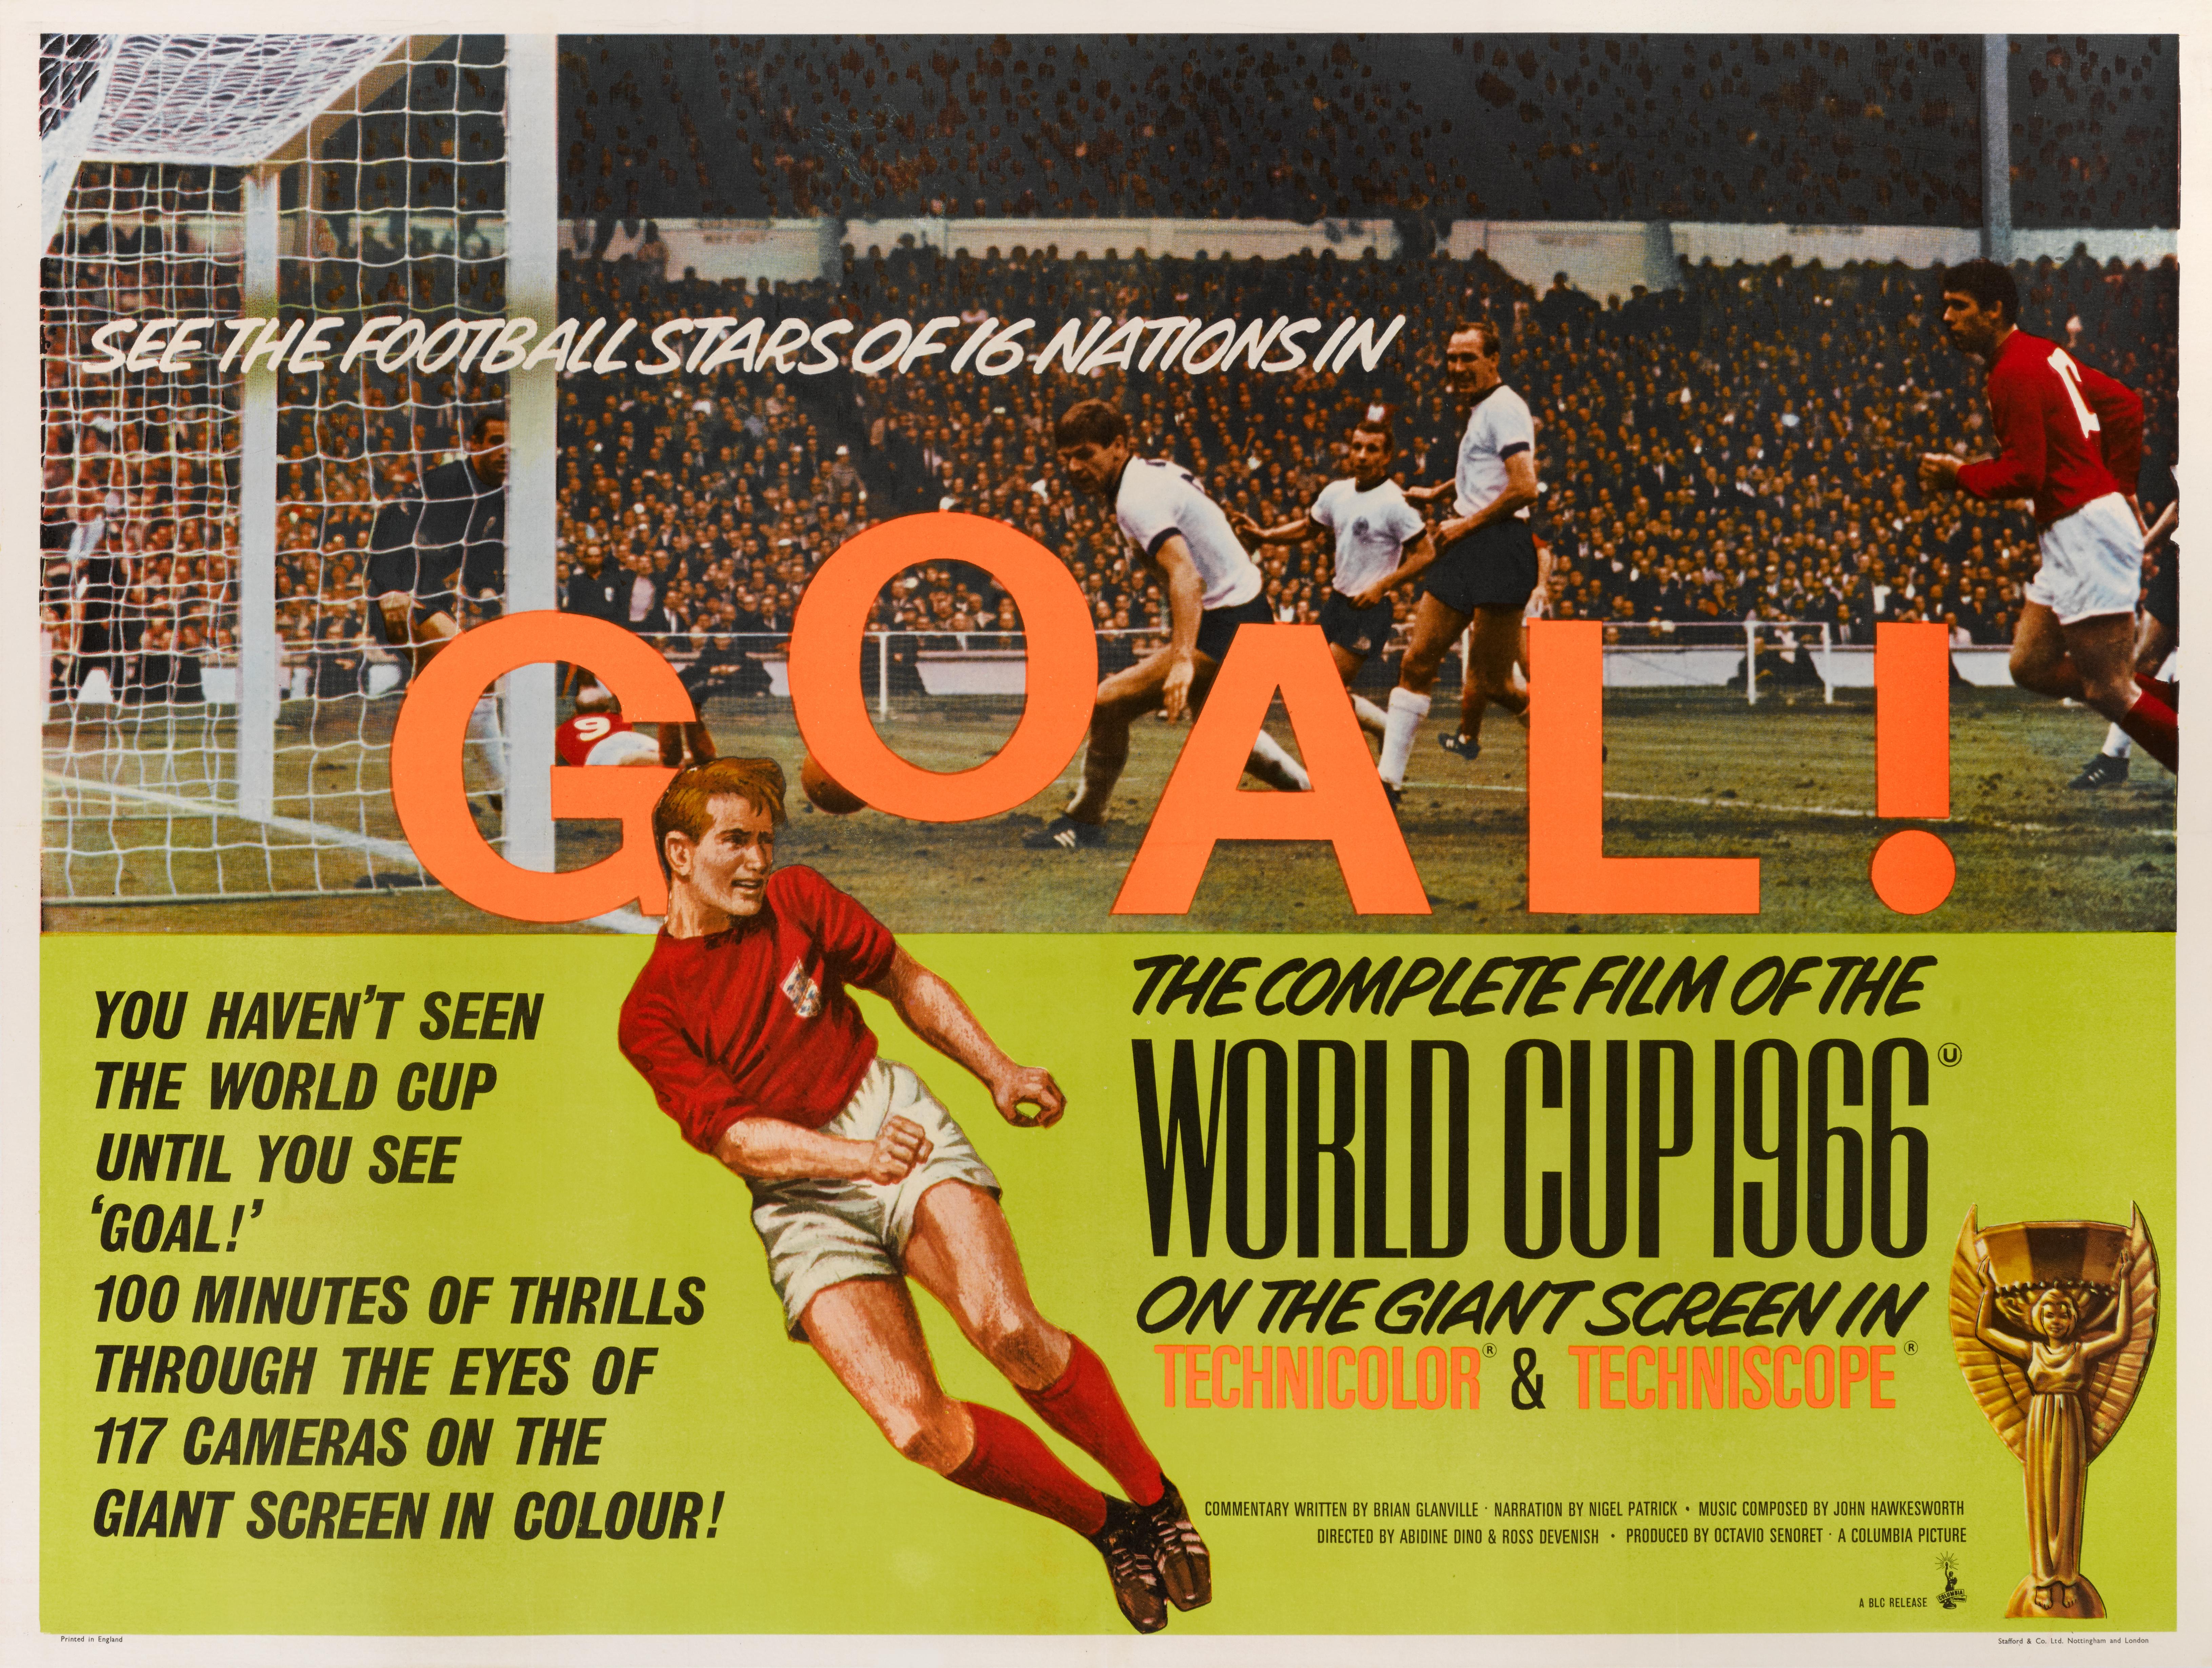 British Goal! The World Cup